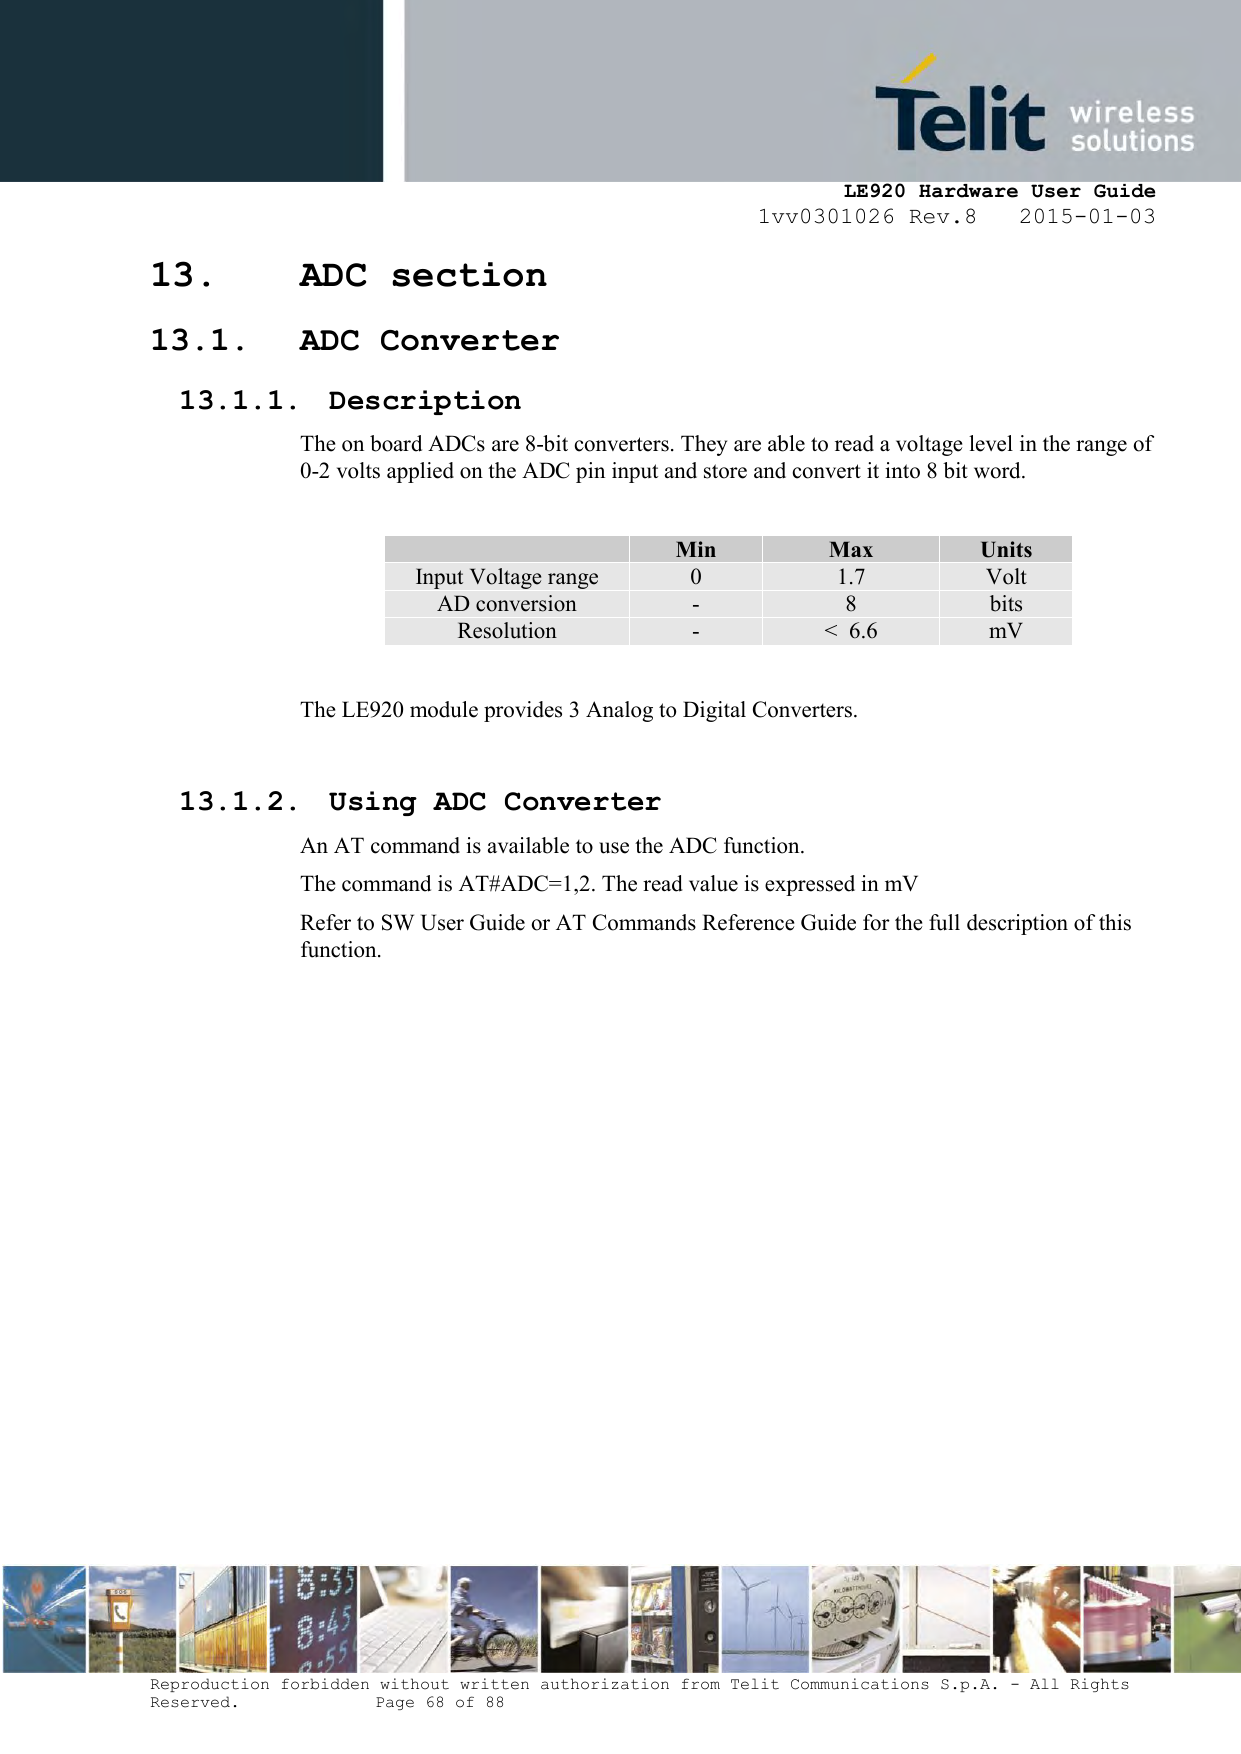     LE920 Hardware User Guide 1vv0301026 Rev.8   2015-01-03 Reproduction forbidden without written authorization from Telit Communications S.p.A. - All Rights Reserved.    Page 68 of 88  13. ADC section 13.1. ADC Converter 13.1.1. Description The on board ADCs are 8-bit converters. They are able to read a voltage level in the range of 0-2 volts applied on the ADC pin input and store and convert it into 8 bit word.   Min Max Units Input Voltage range 0 1.7 Volt AD conversion - 8 bits Resolution - &lt;  6.6 mV  The LE920 module provides 3 Analog to Digital Converters.   13.1.2. Using ADC Converter An AT command is available to use the ADC function.  The command is AT#ADC=1,2. The read value is expressed in mV Refer to SW User Guide or AT Commands Reference Guide for the full description of this function.  